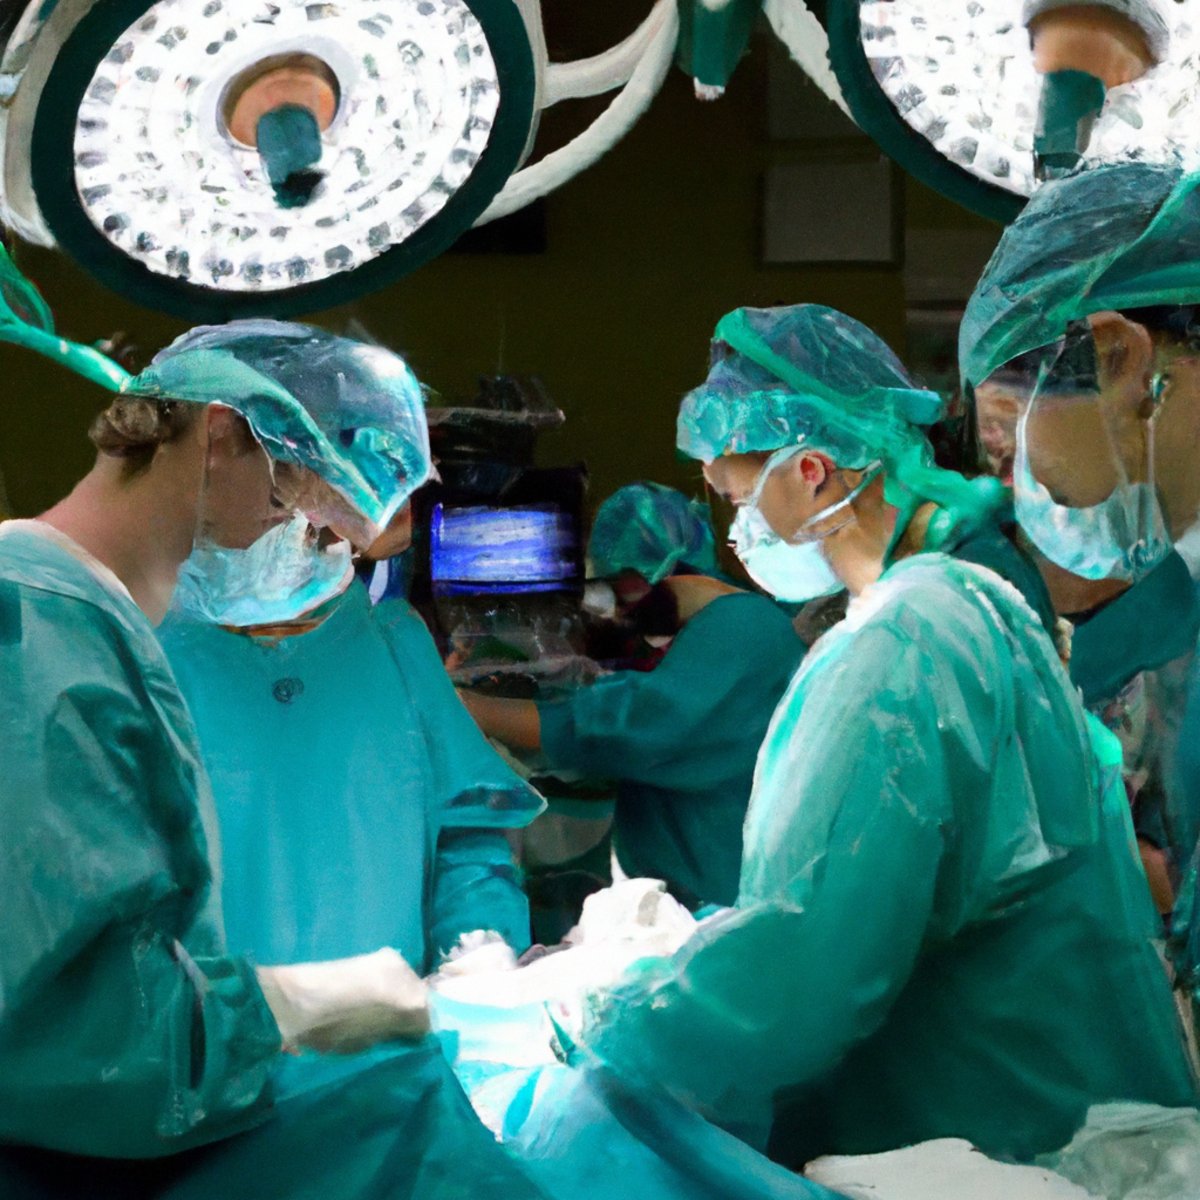 Skilled medical team performing complex procedure in surgical theater, highlighting dedication in treating gallbladder leiomyosarcoma.